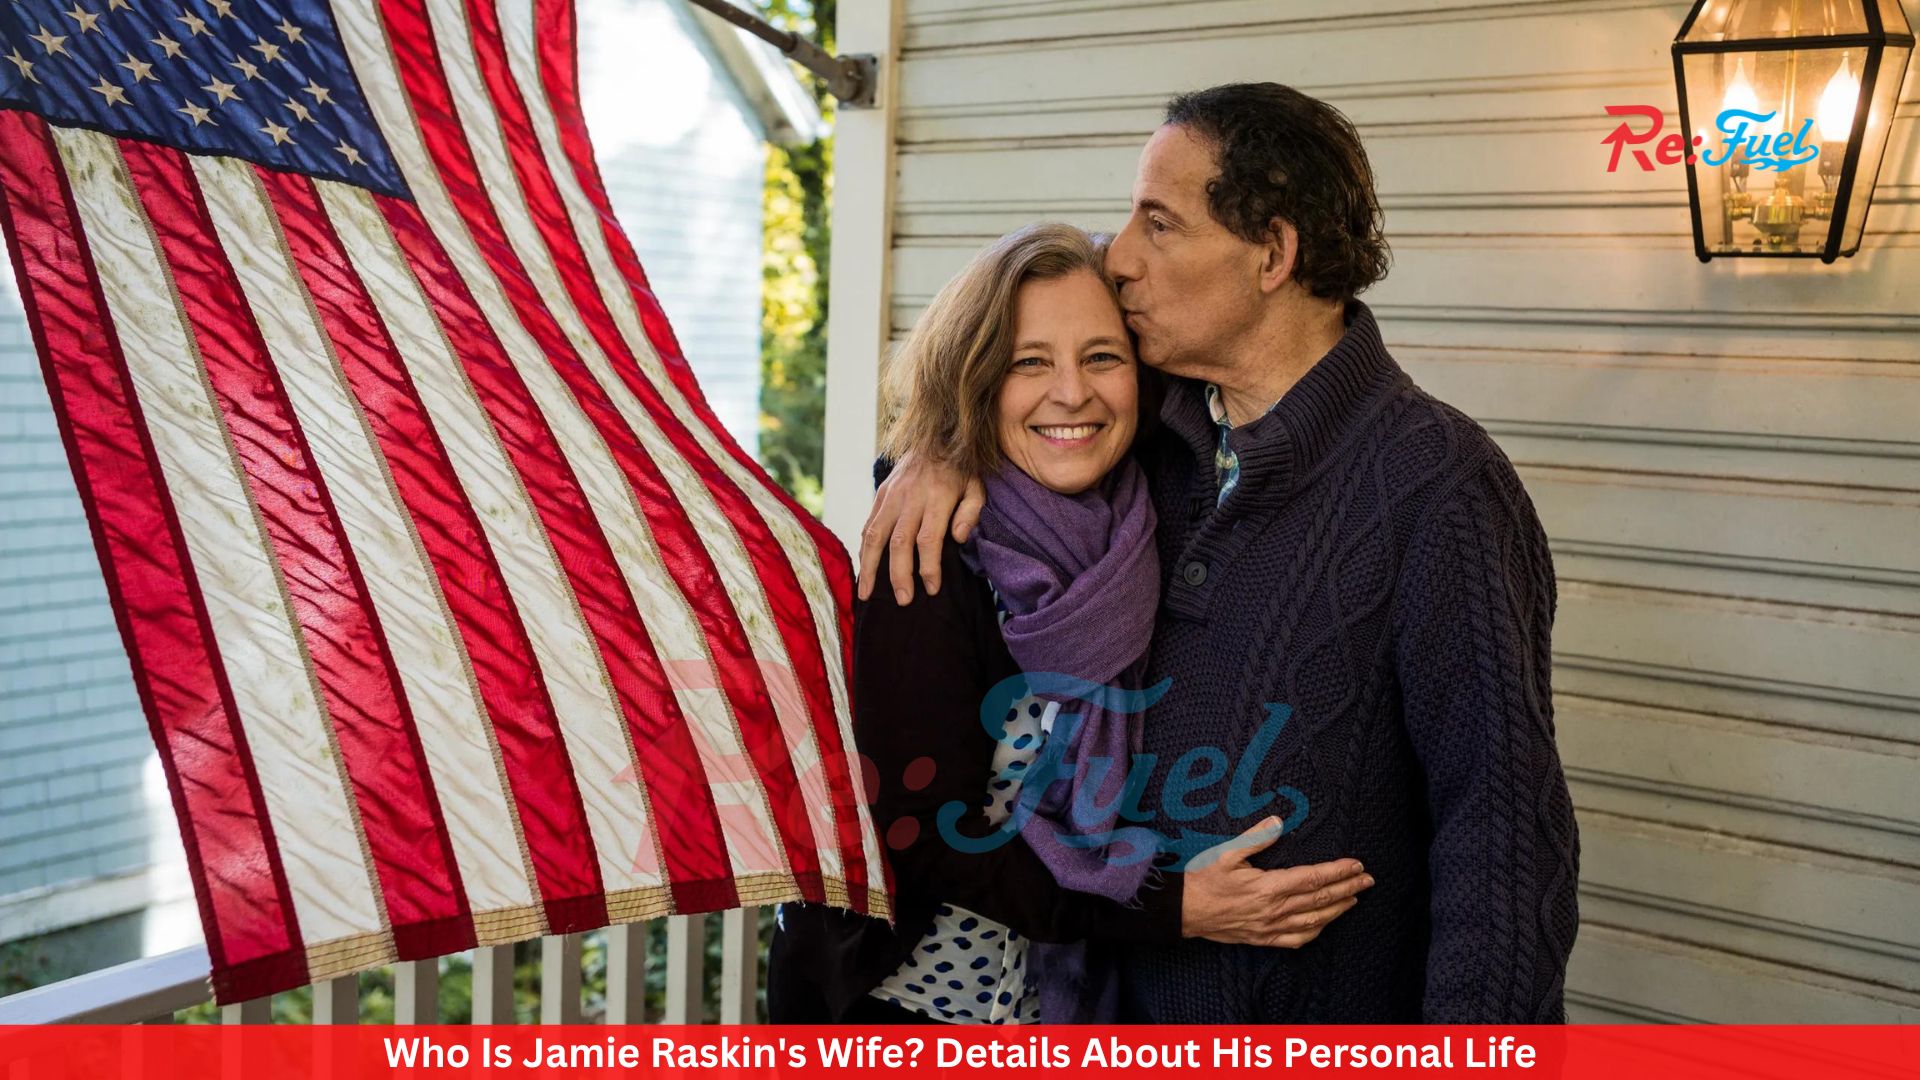 Who Is Jamie Raskin's Wife? Details About His Personal Life